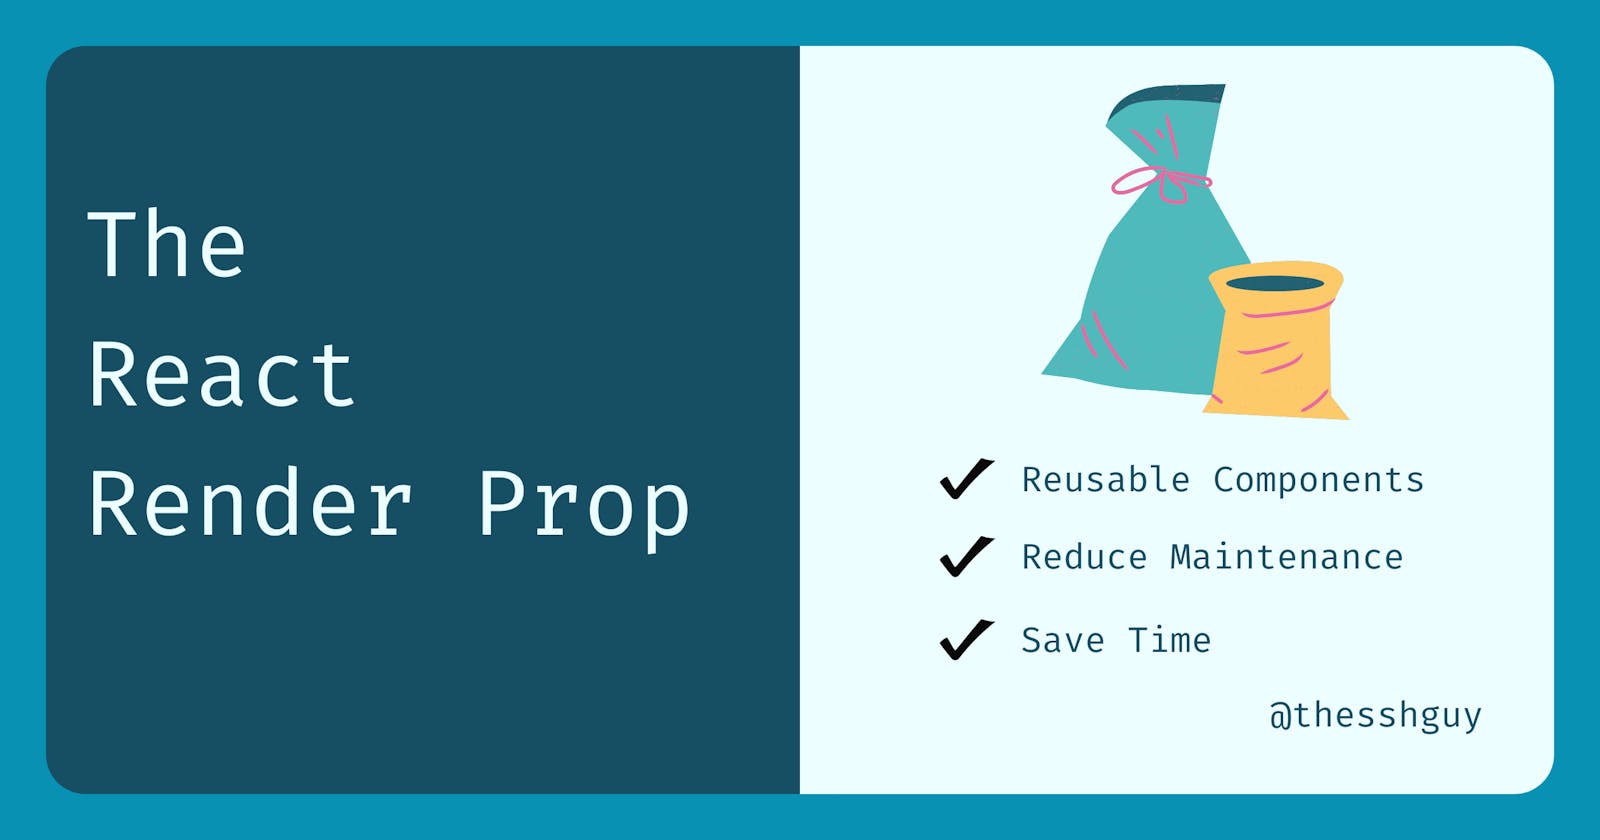 The React Render Prop: How to build reusable components, reduce maintenance costs, and save time